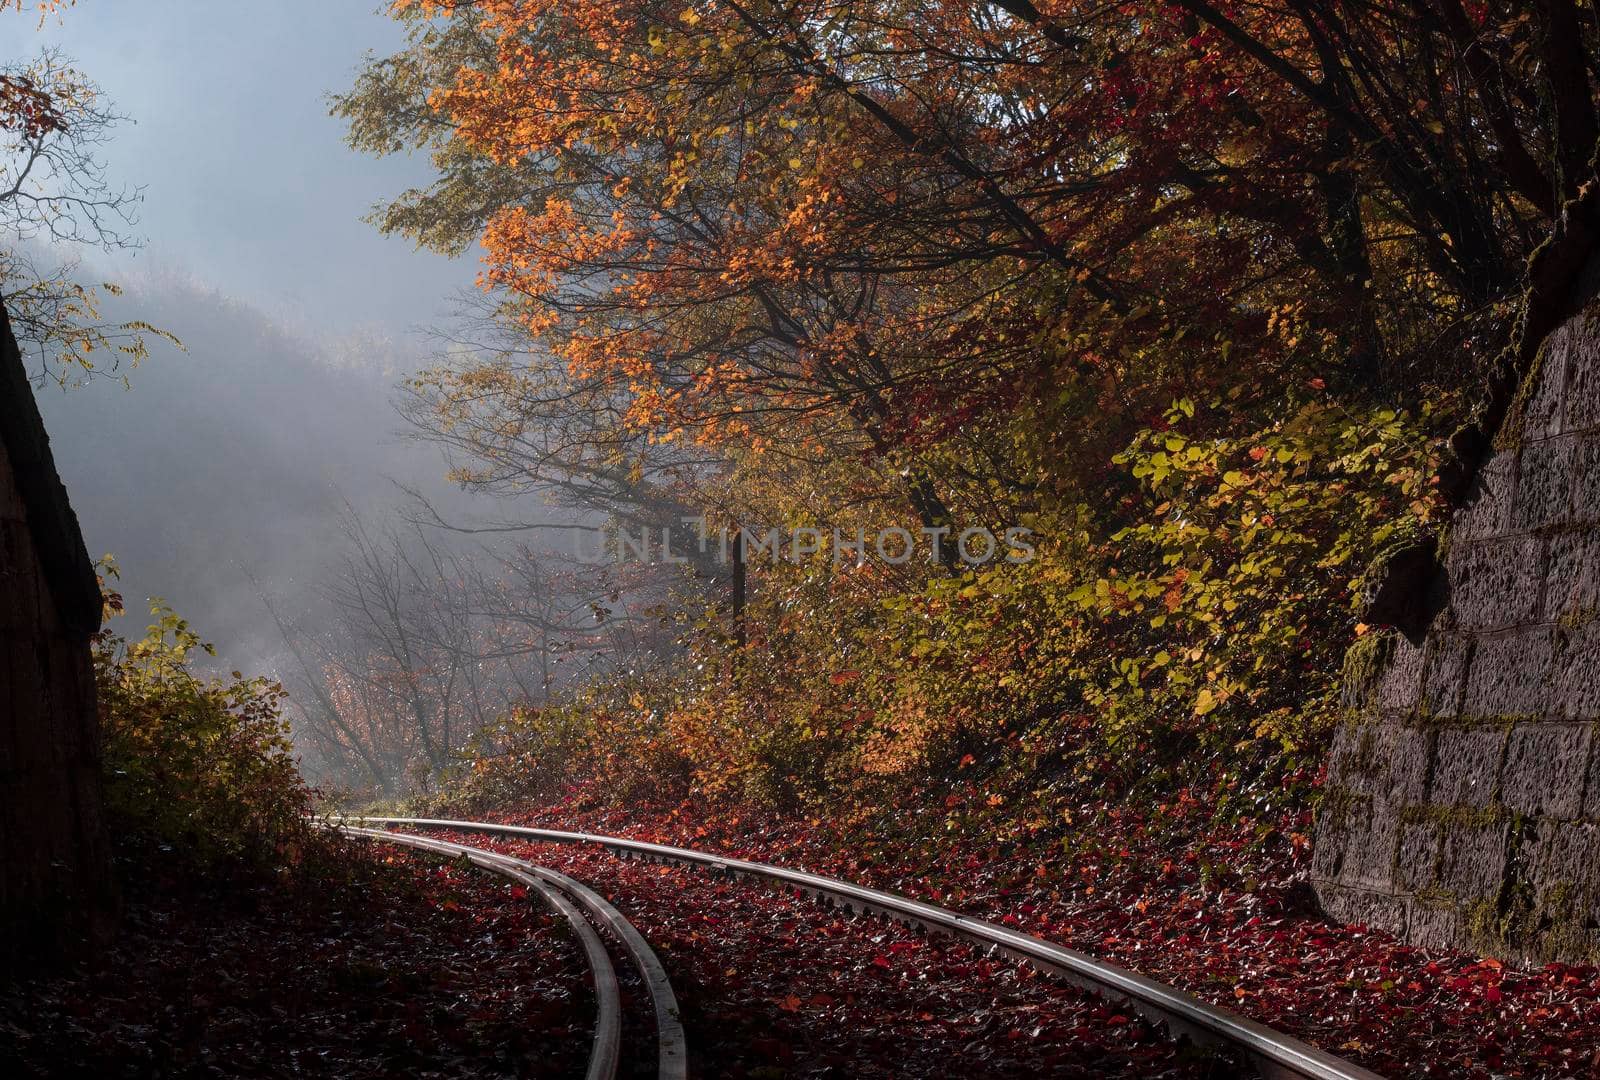 Autumn leaves lying on the rail with autumn colors by bybyphotography